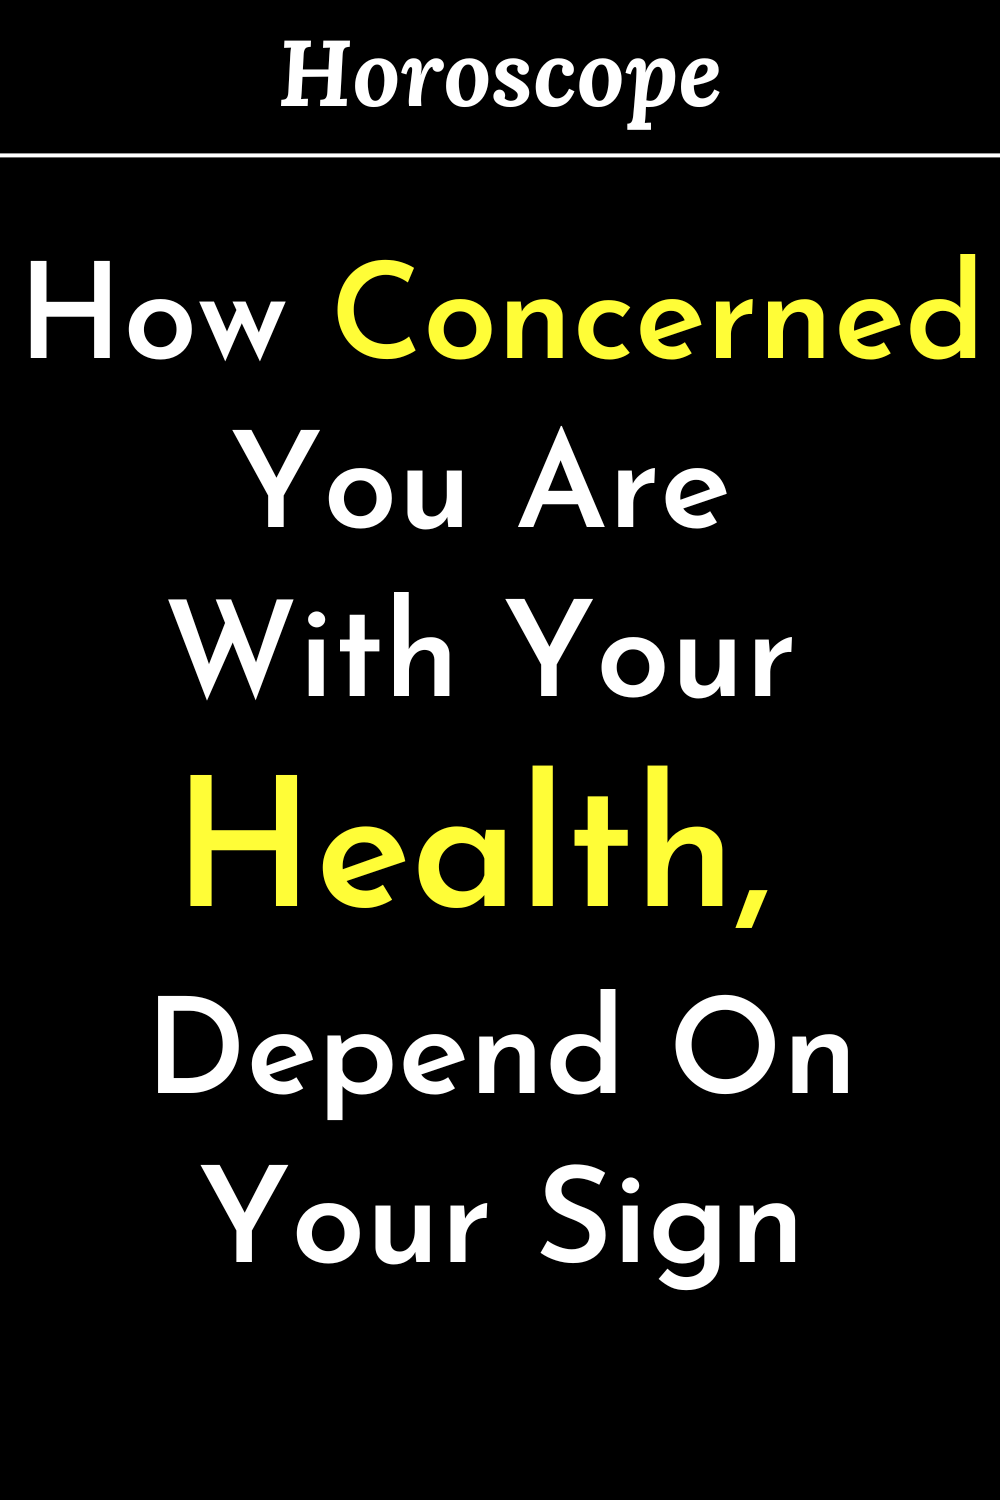 How Concerned You Are With Your Health, Depend On Your Sign